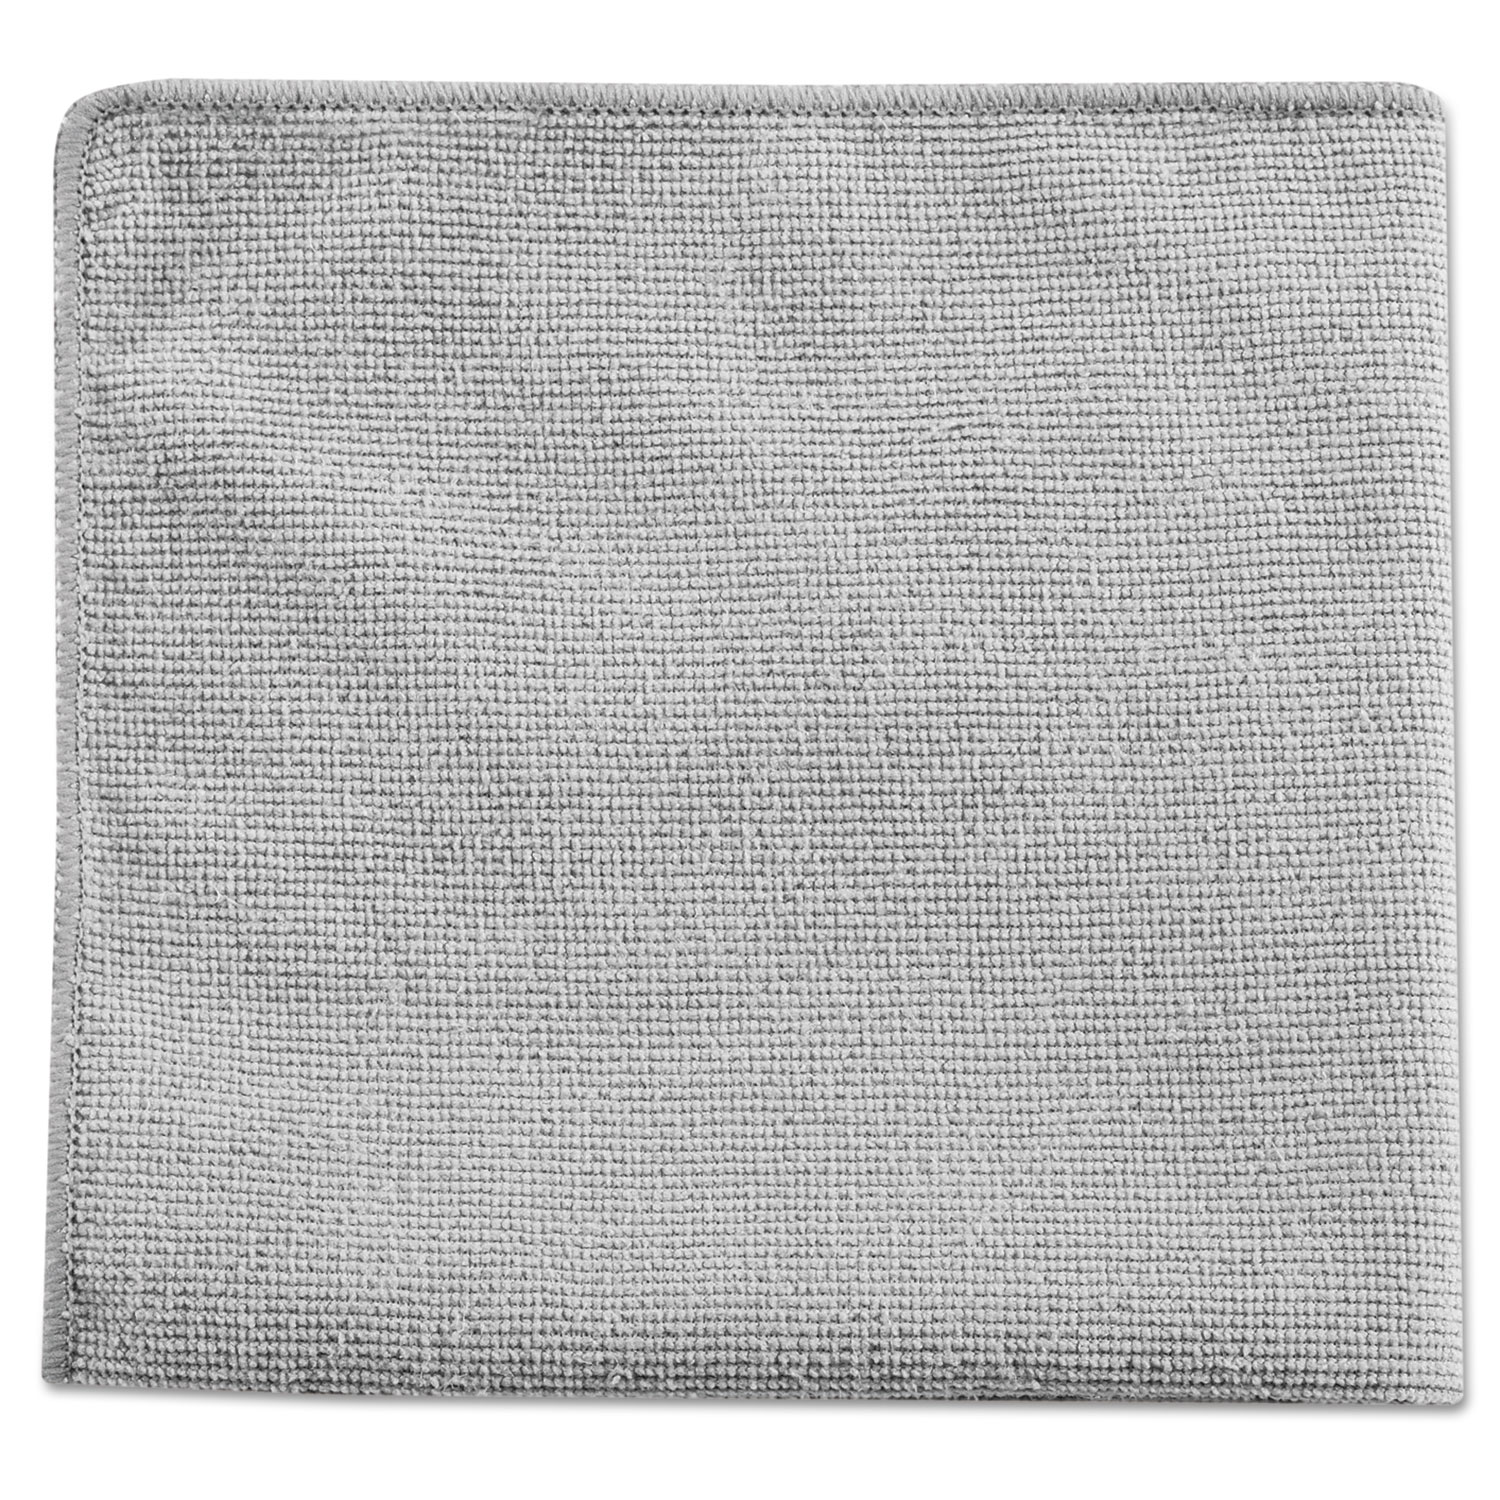  Rubbermaid Commercial 1863888 Executive Multi-Purpose Microfiber Cloths, Gray, 12 x 12, 24/Pack (RCP1863888) 